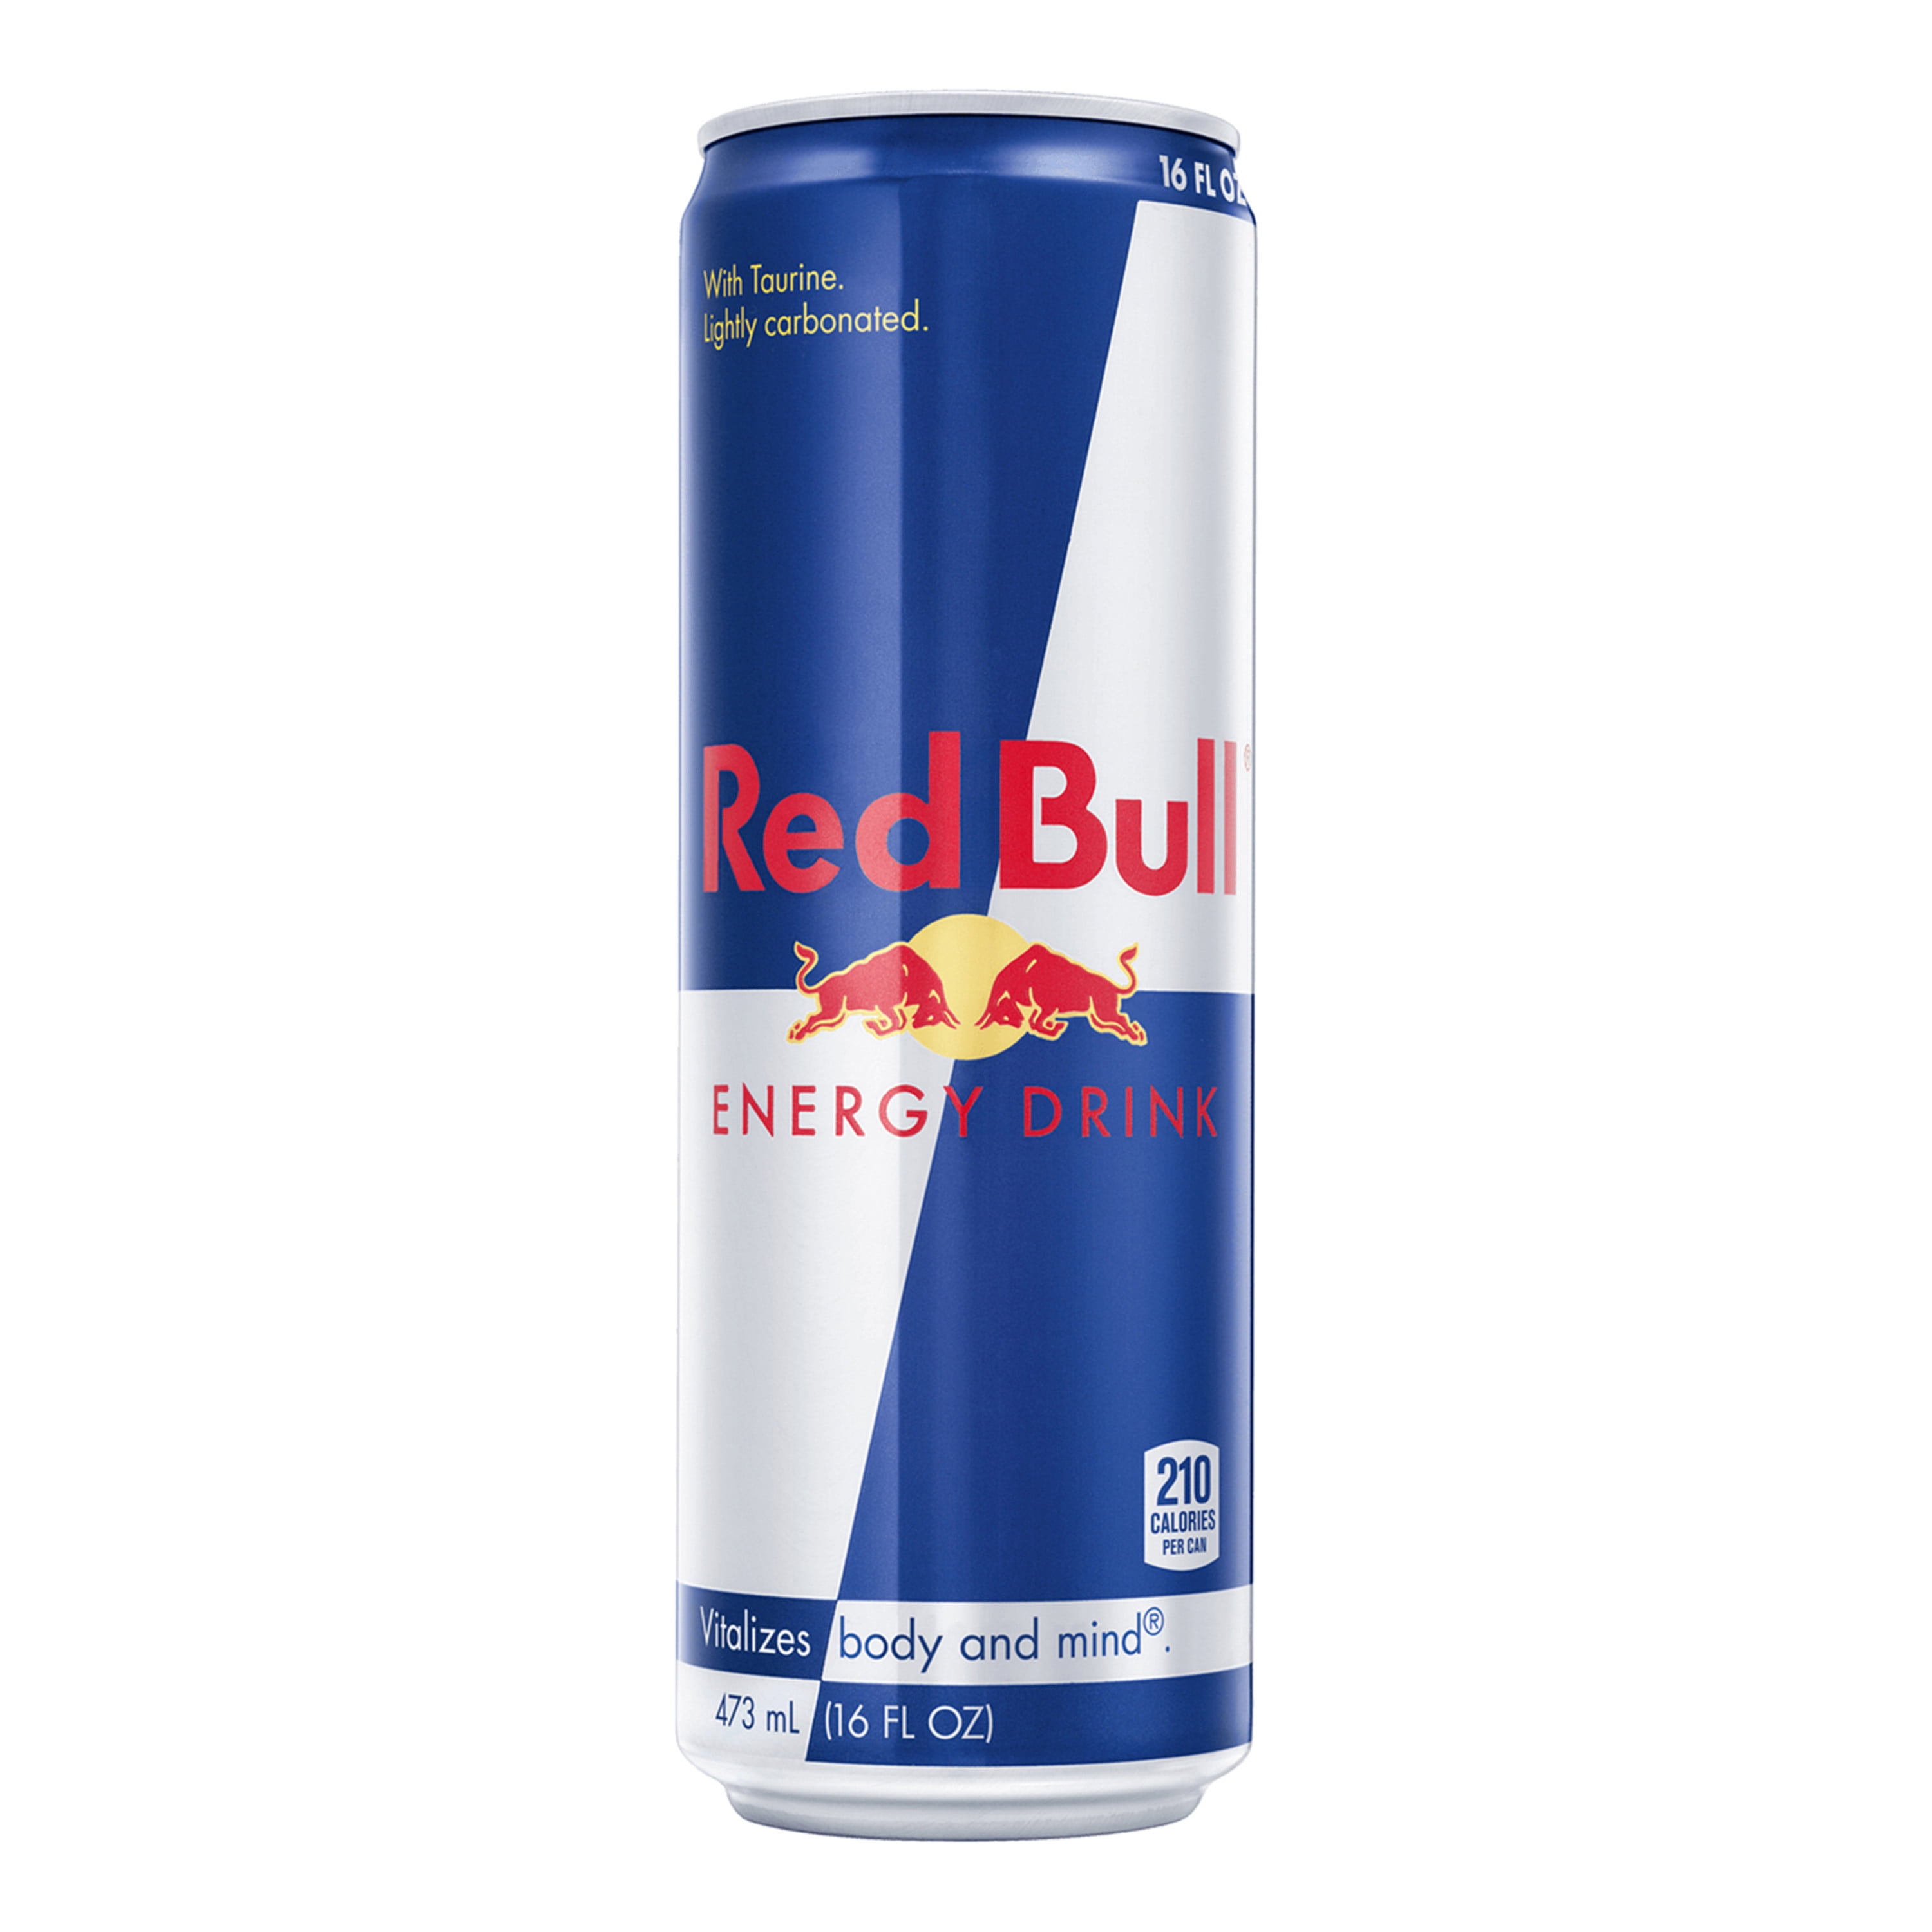 Buy Red Bull Energy Drink, 16 Fl Oz Online at Lowest Price in New